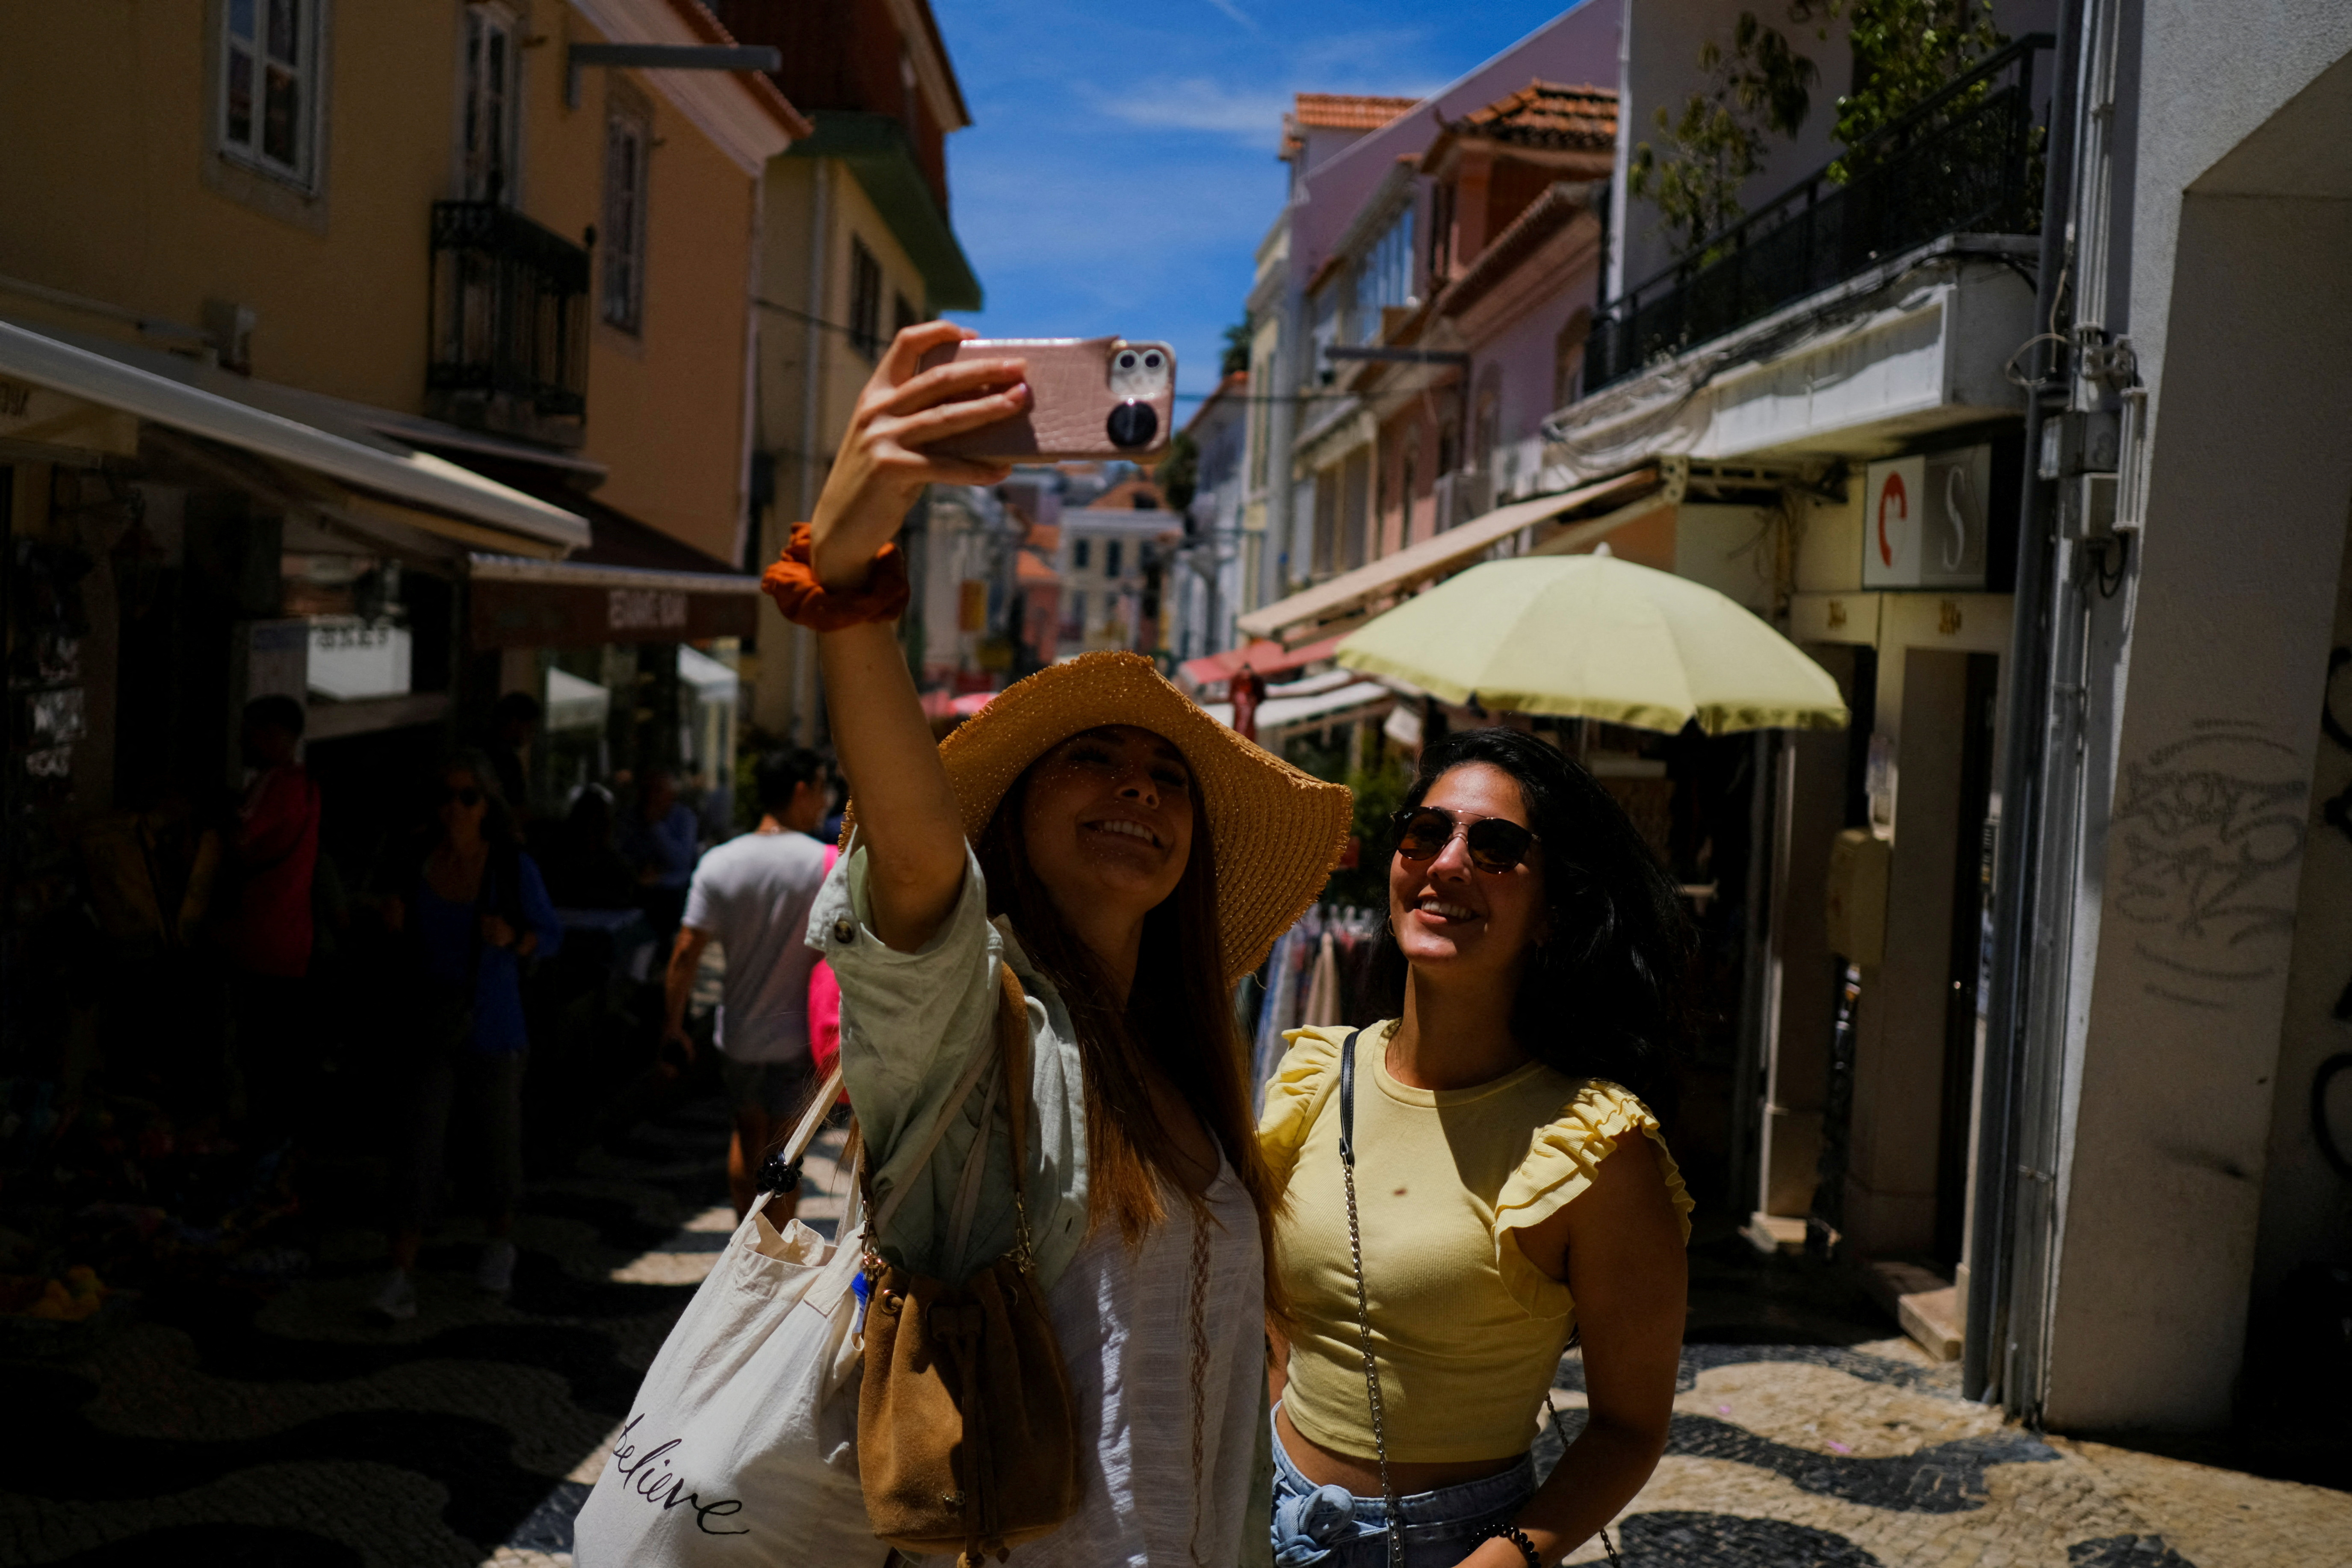 Tourists take a picture on a street in Cascais